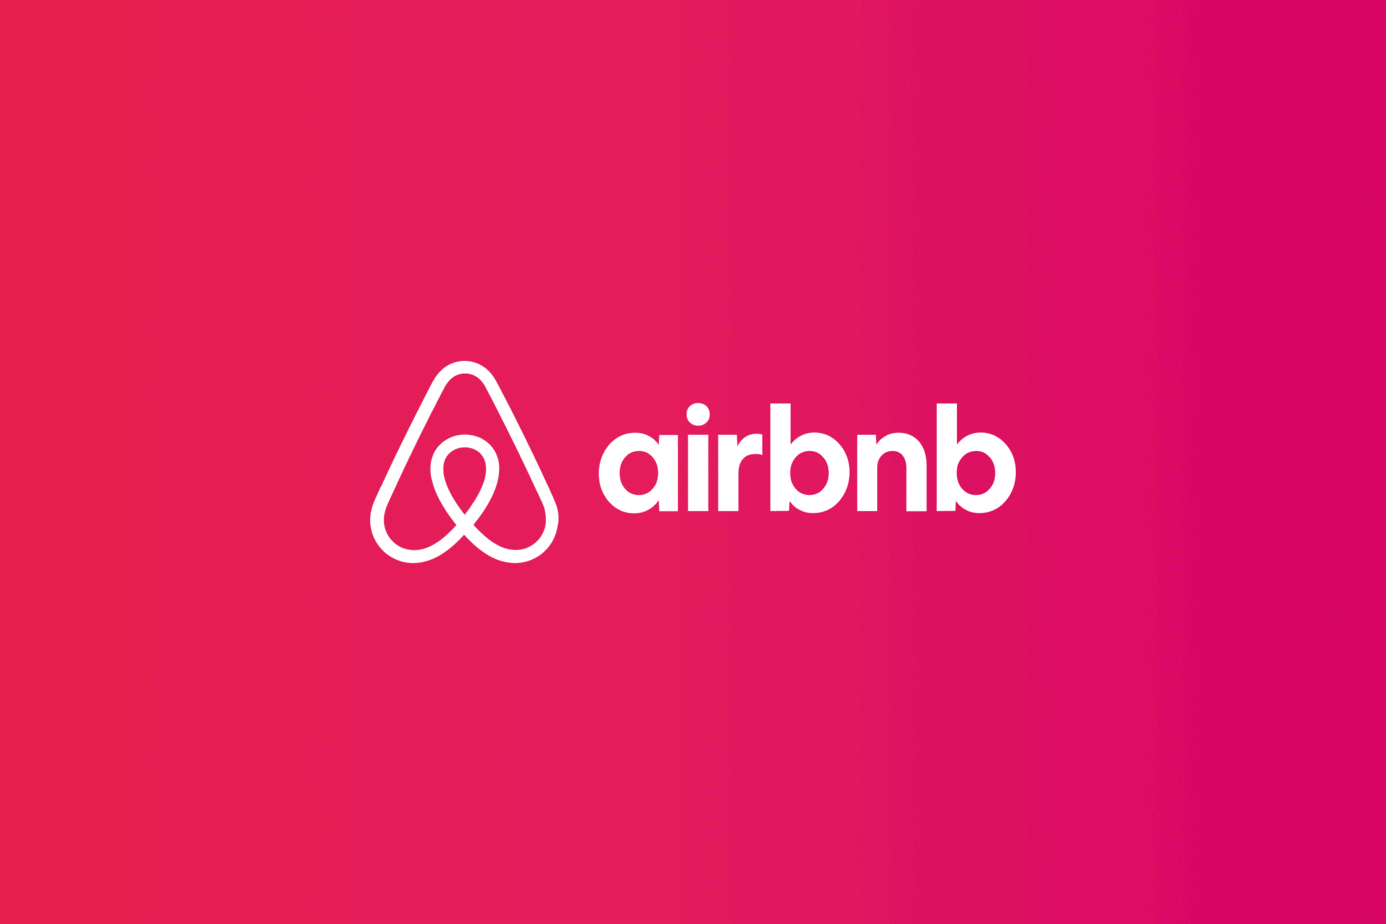 Party rentals face new limits from Airbnb Sedona Red Rock News